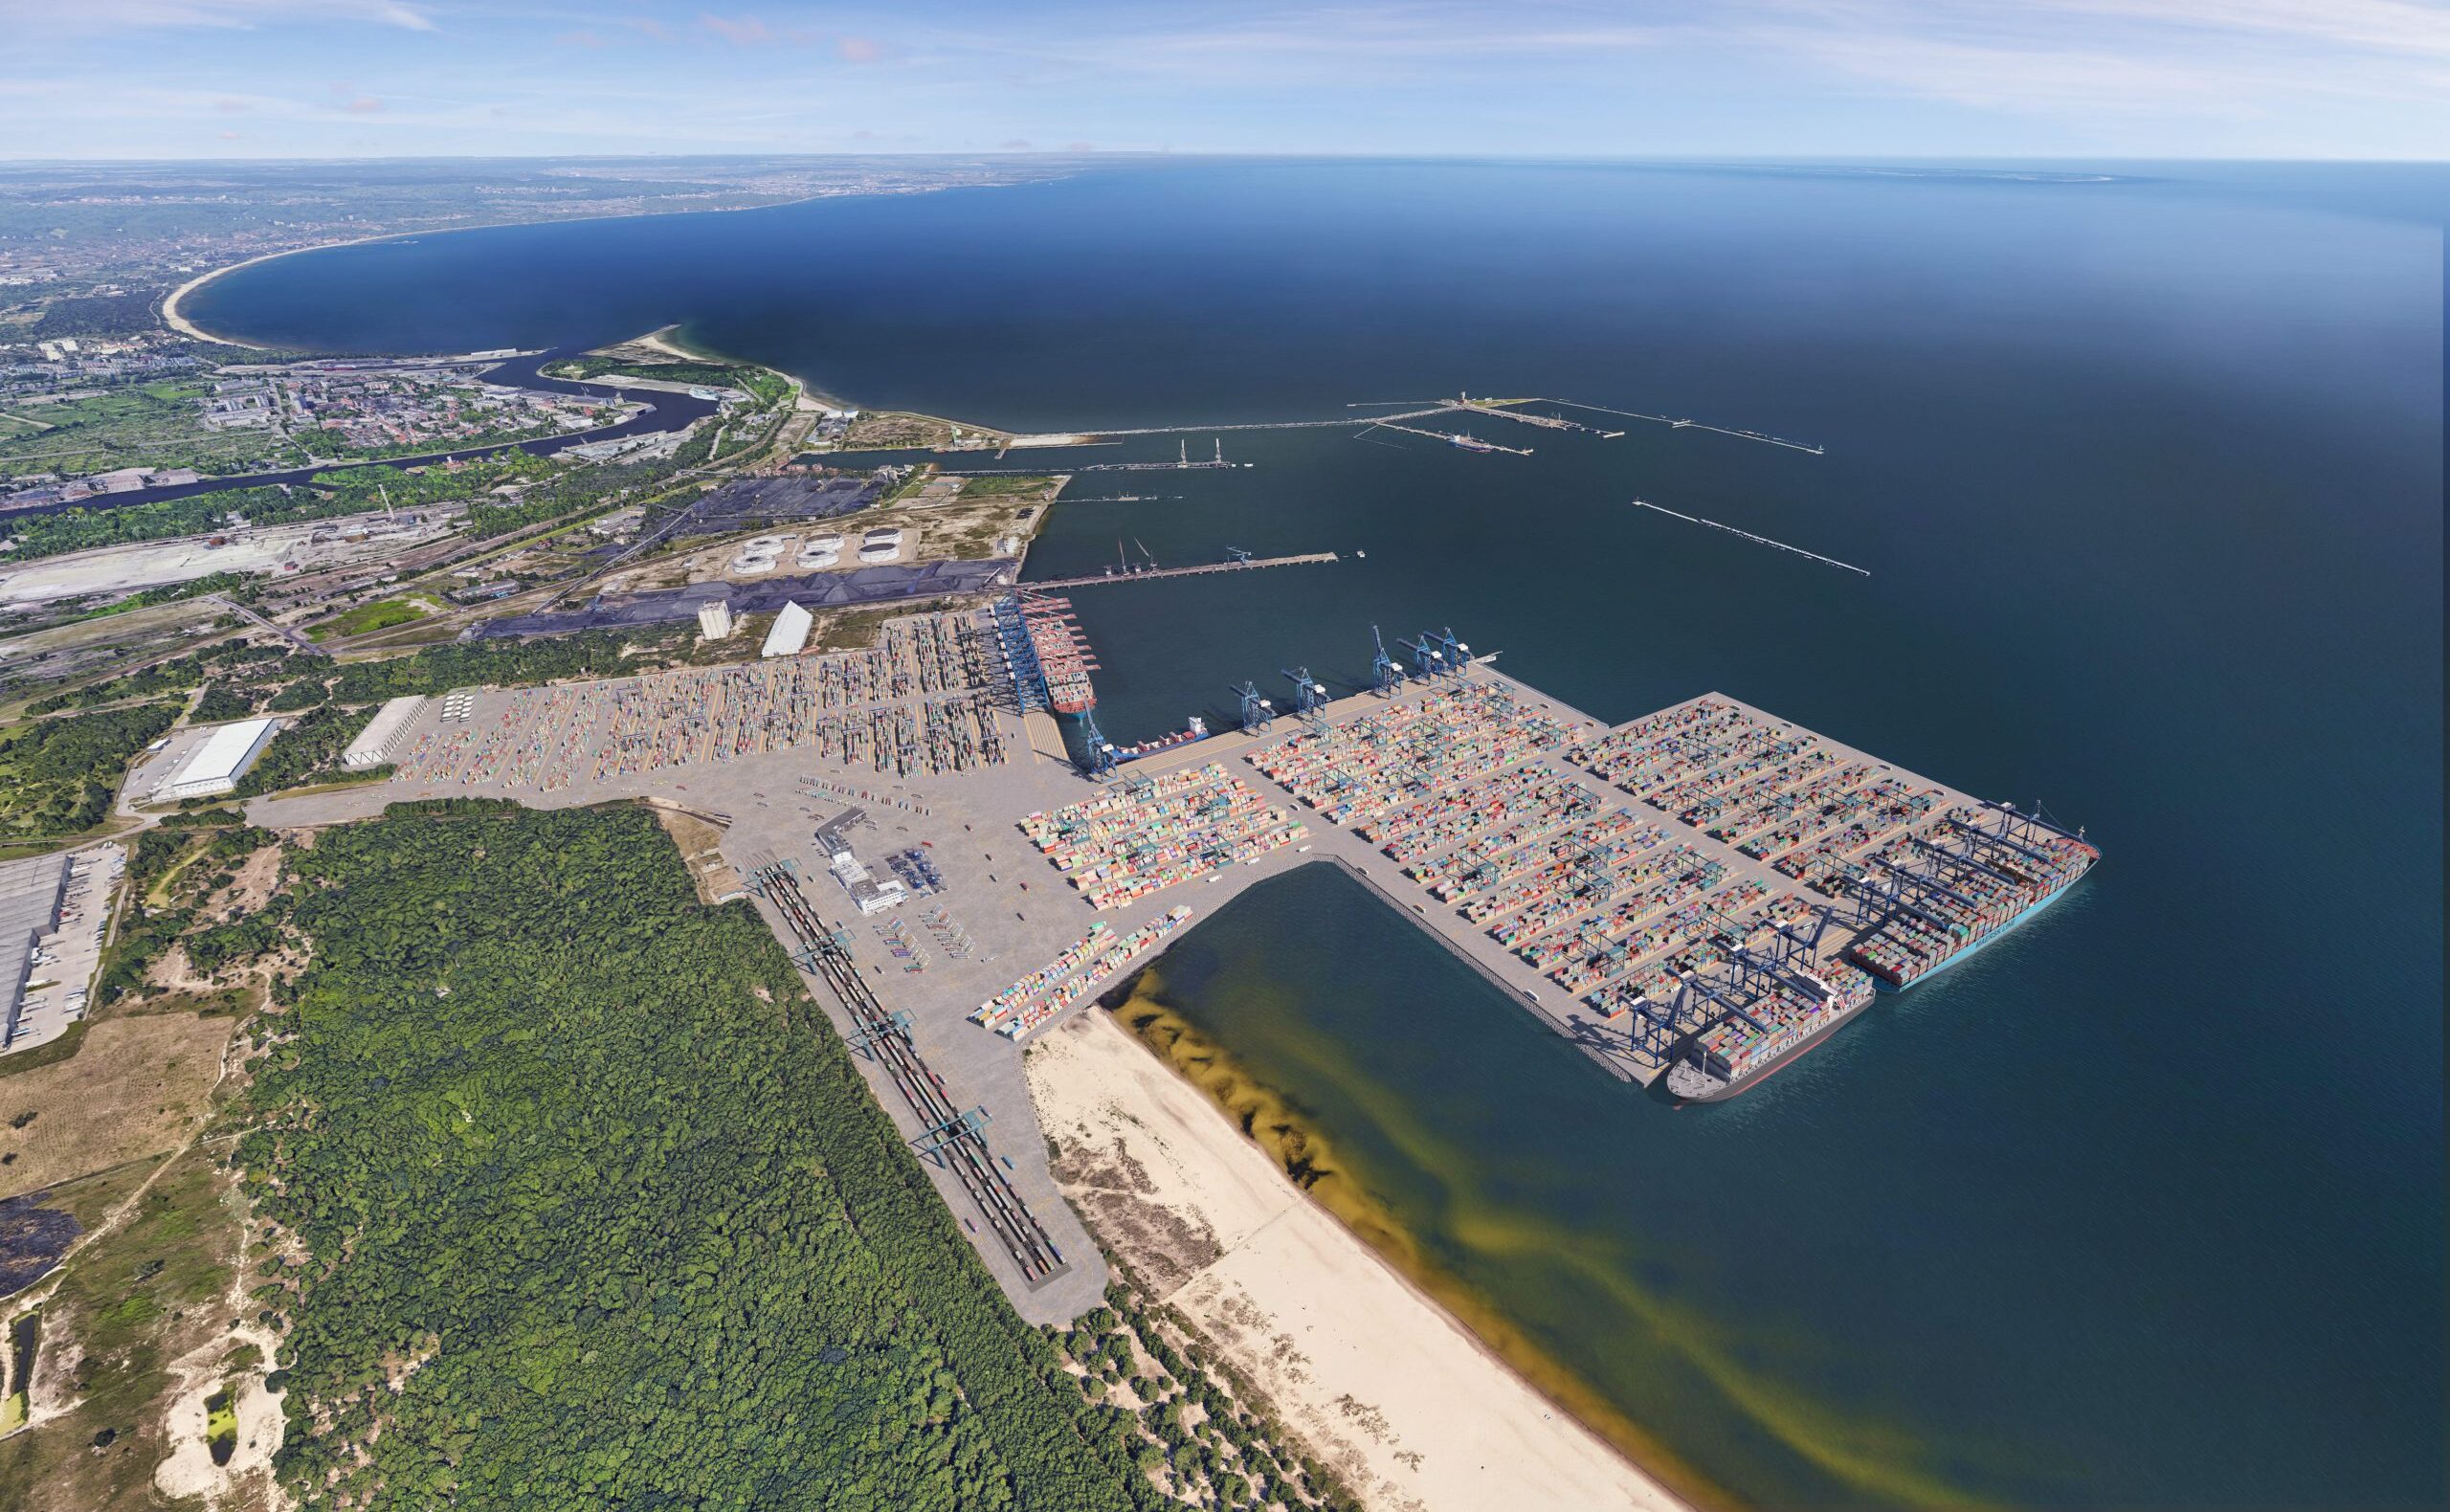 DCT Gdansk to build one of the largest container terminals in Europe for €470 million